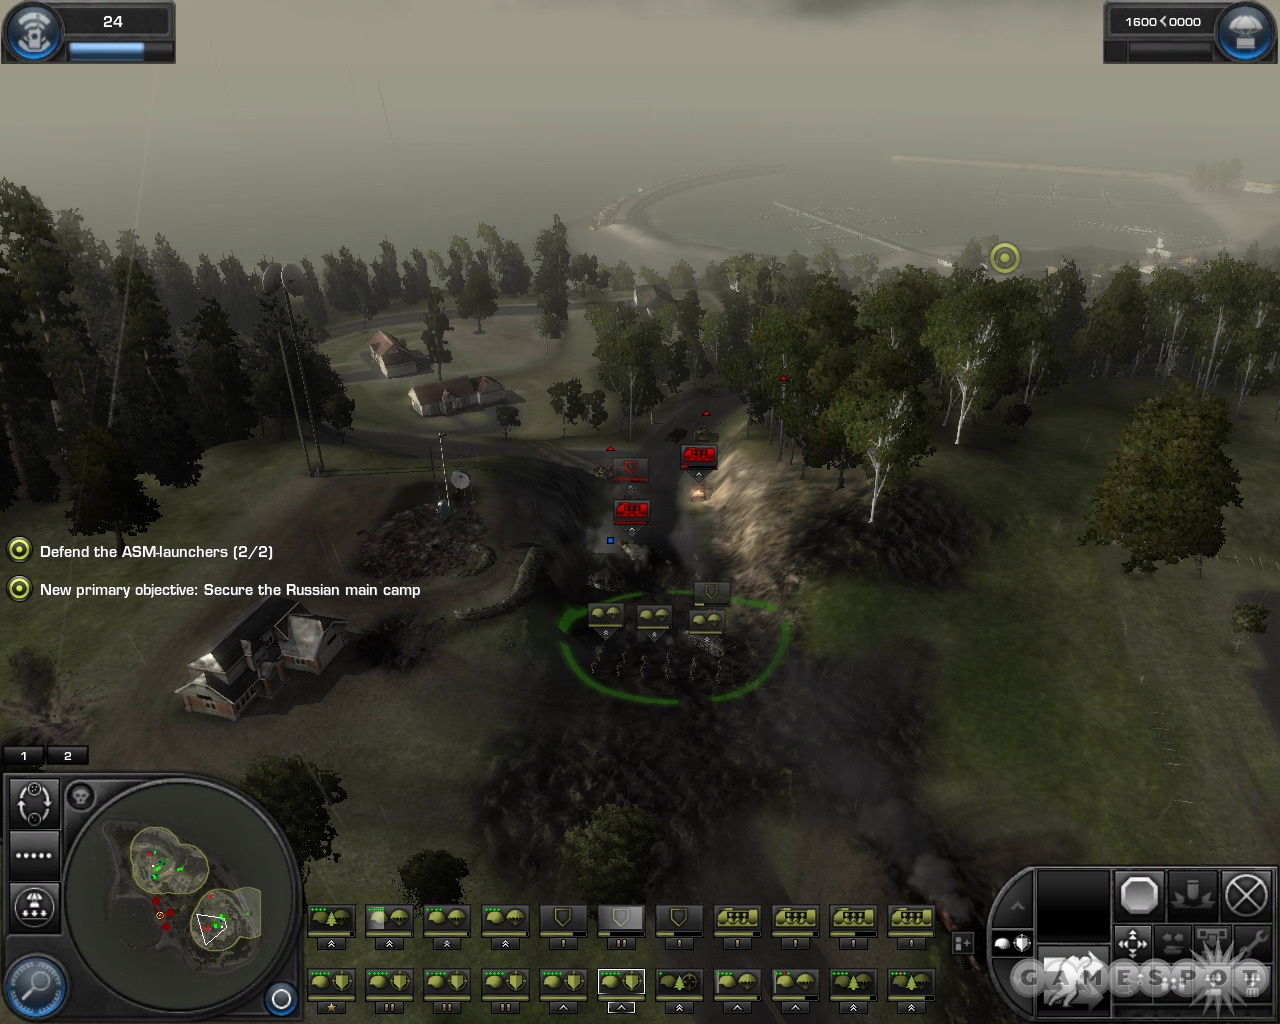 This will be the point where the Soviets will attack the hardest, so get anti-tank soldiers into the woods here.